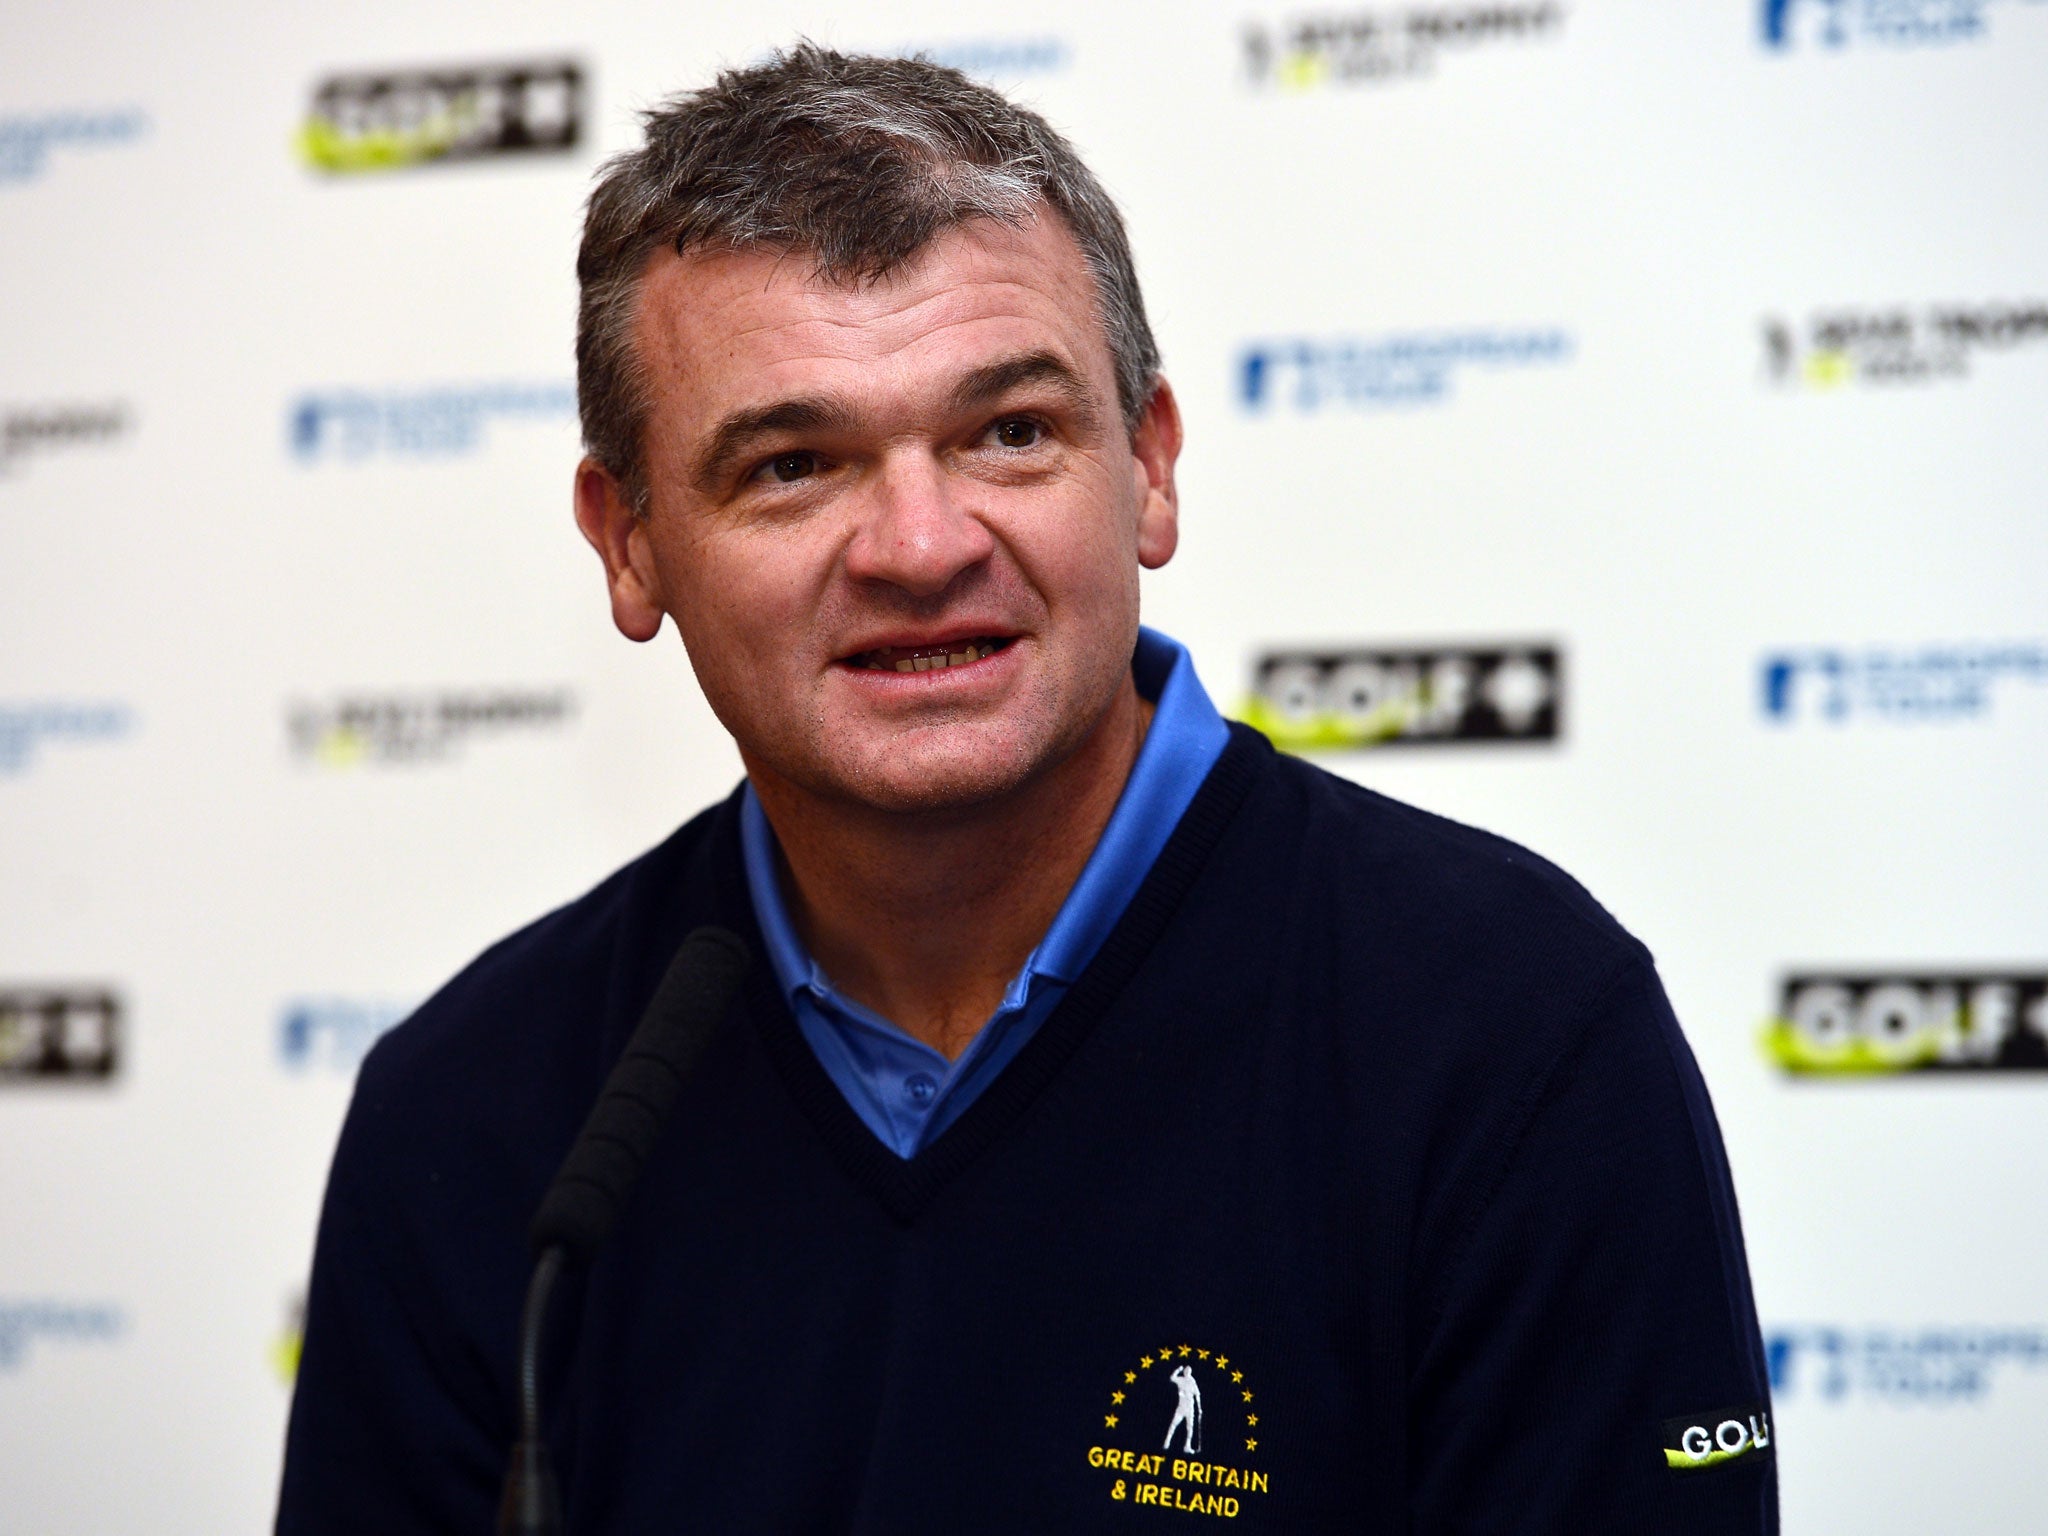 Paul Lawrie: The Scot helped get the GB & Ireland team off to a winning start